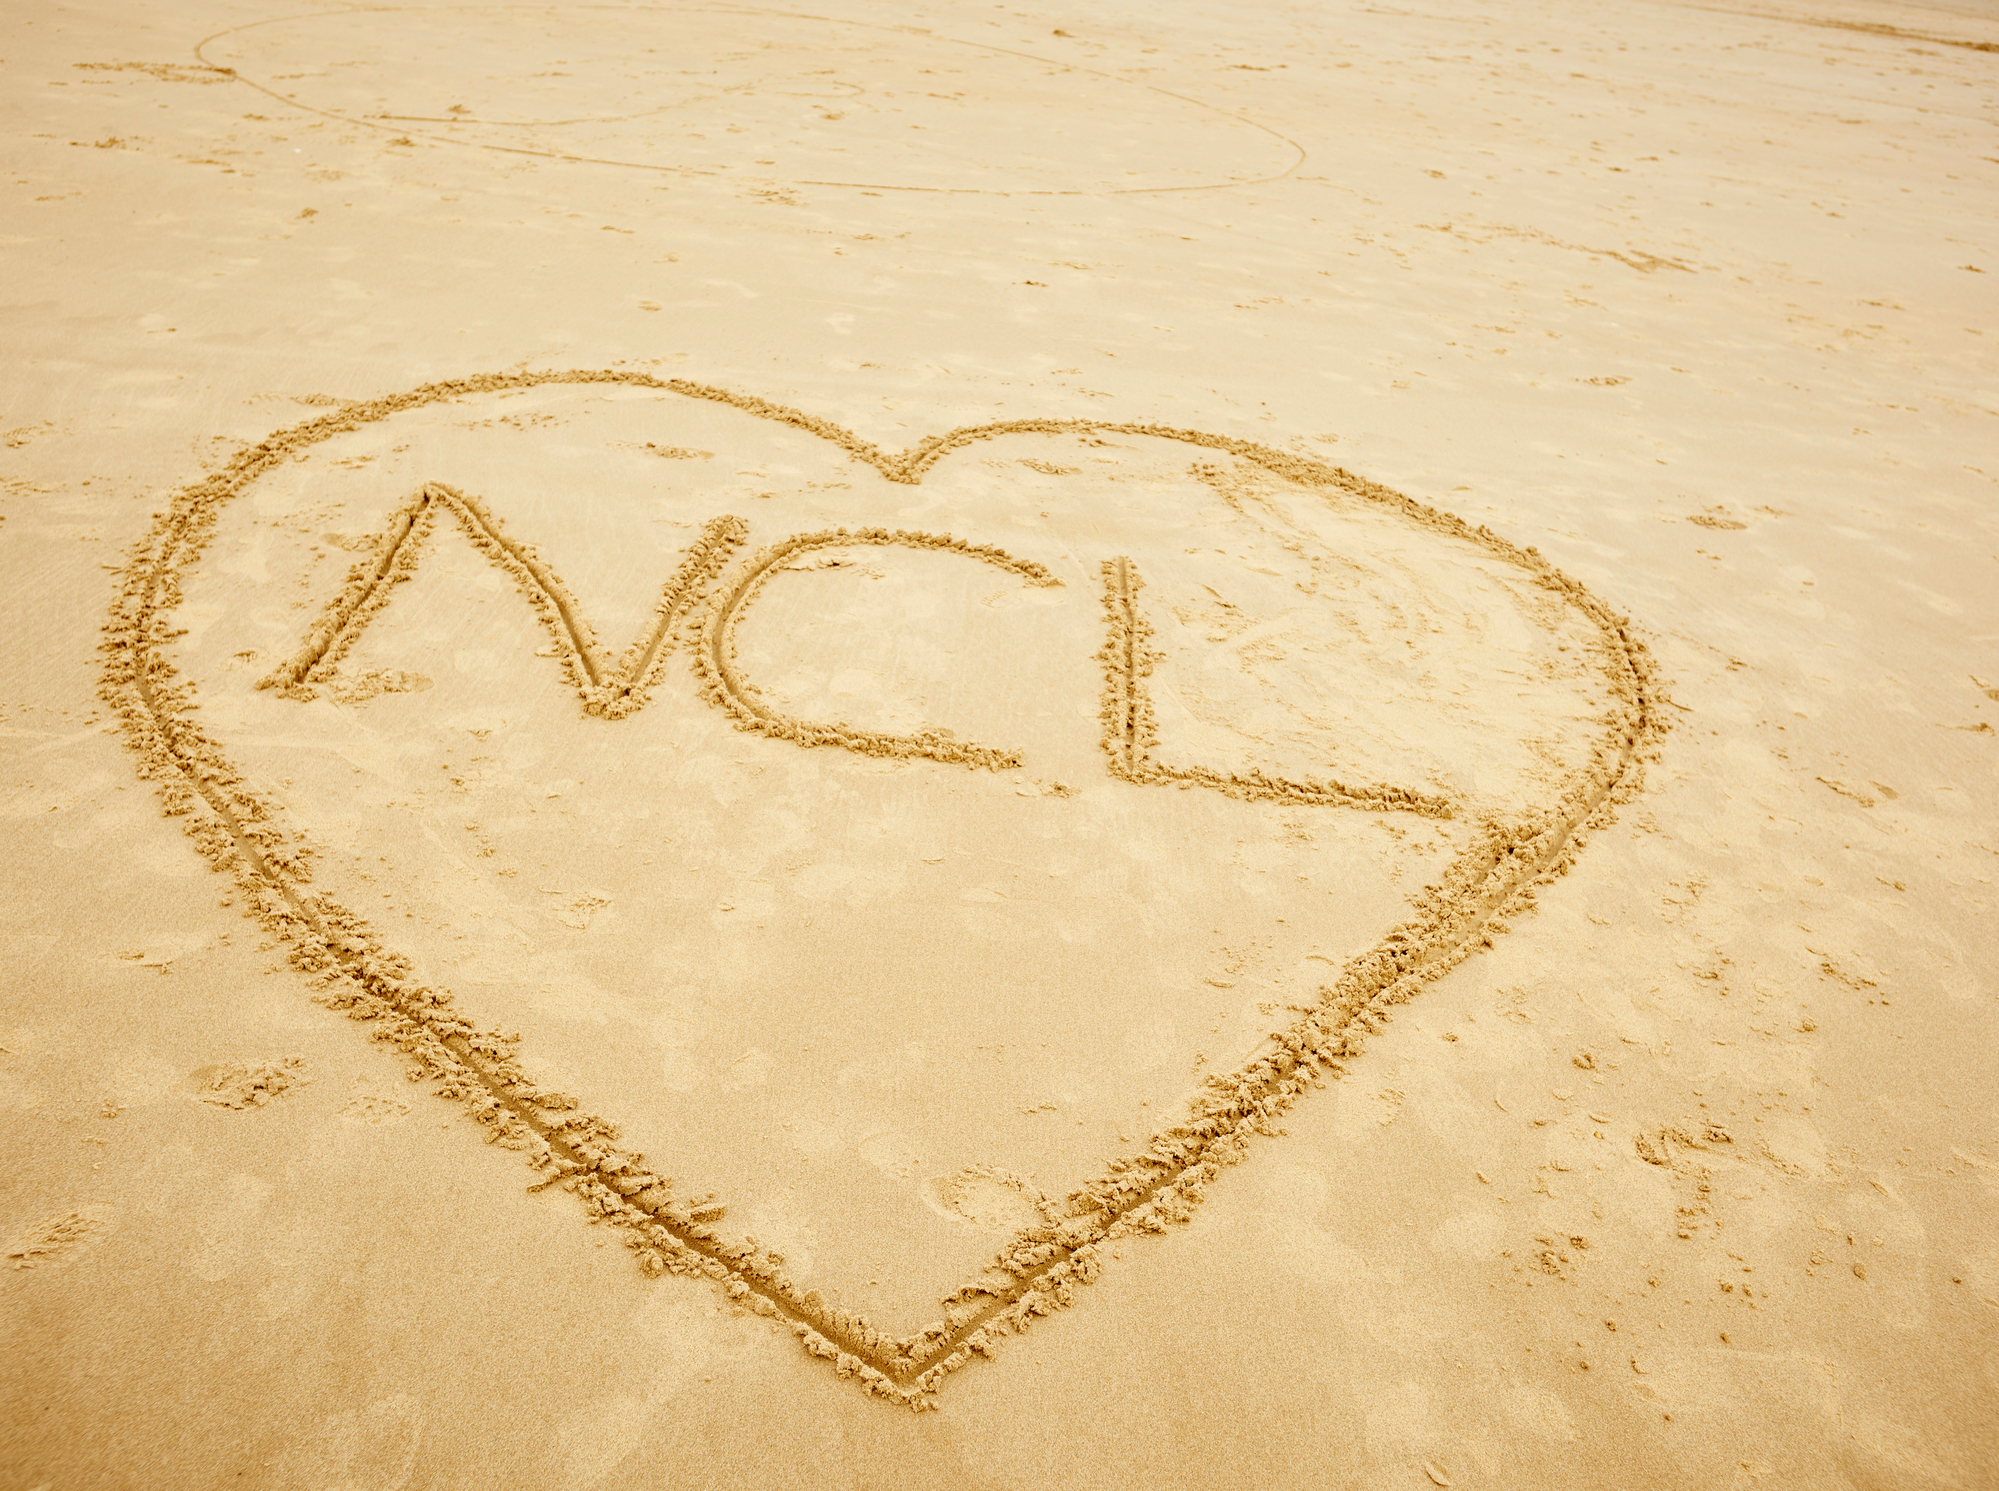 A heart with NCL in the centre drawn on the beach